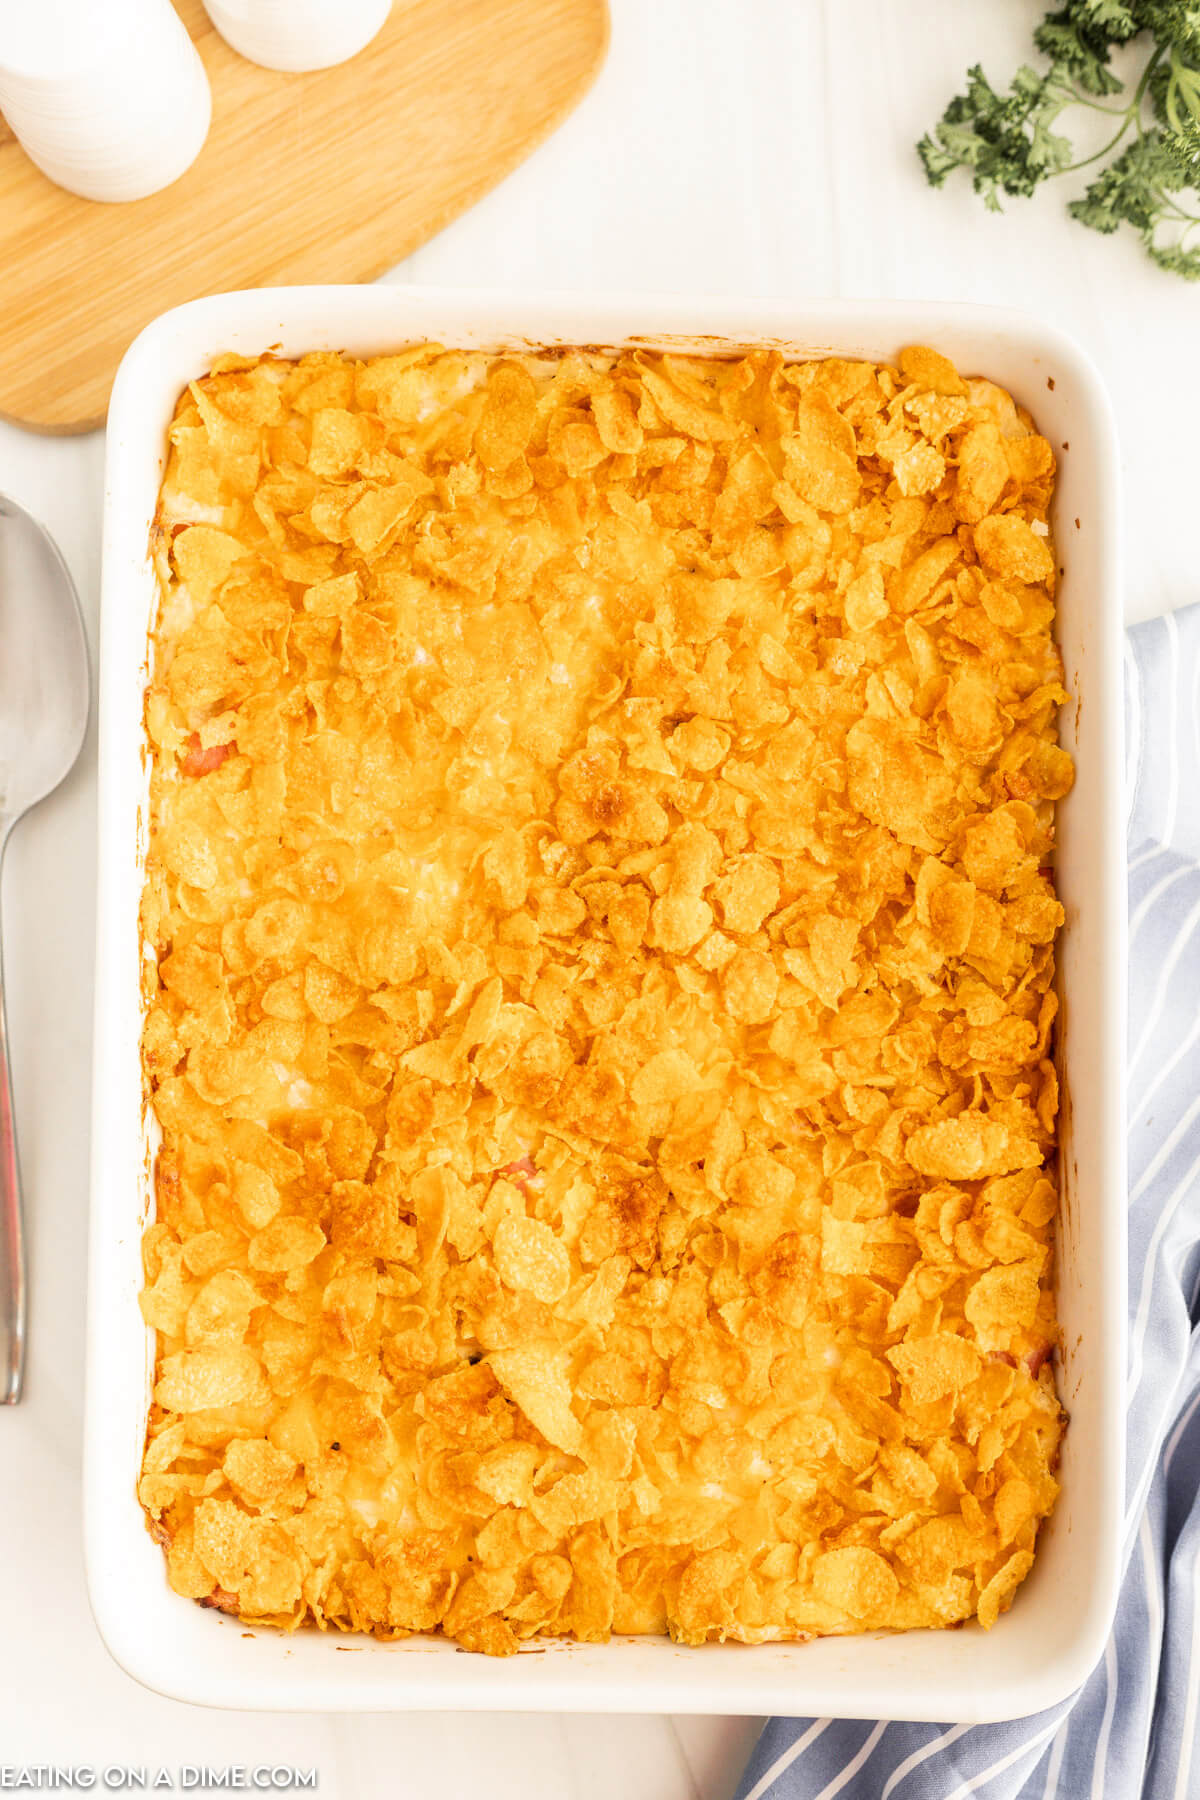 Funeral potatoes in a baking dish